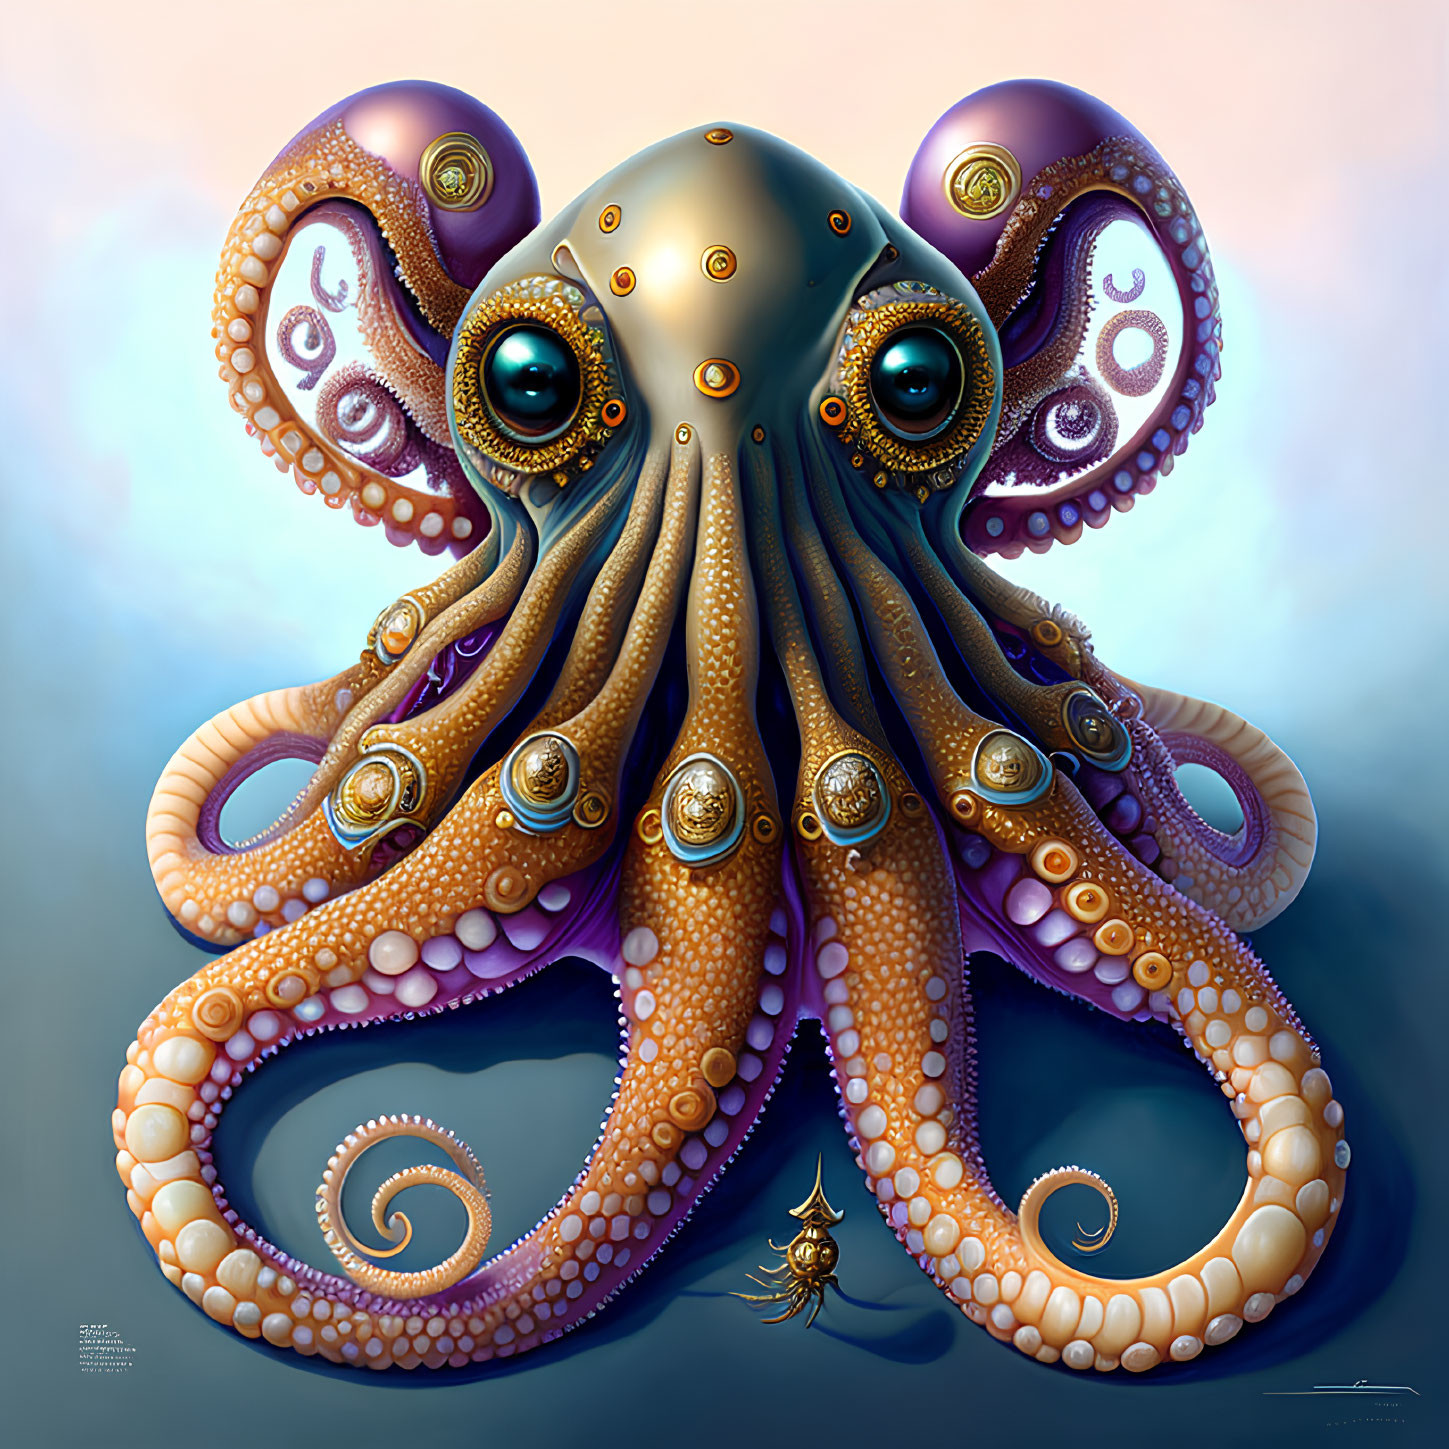 Stylized octopus digital illustration with expressive eyes and ornate tentacles